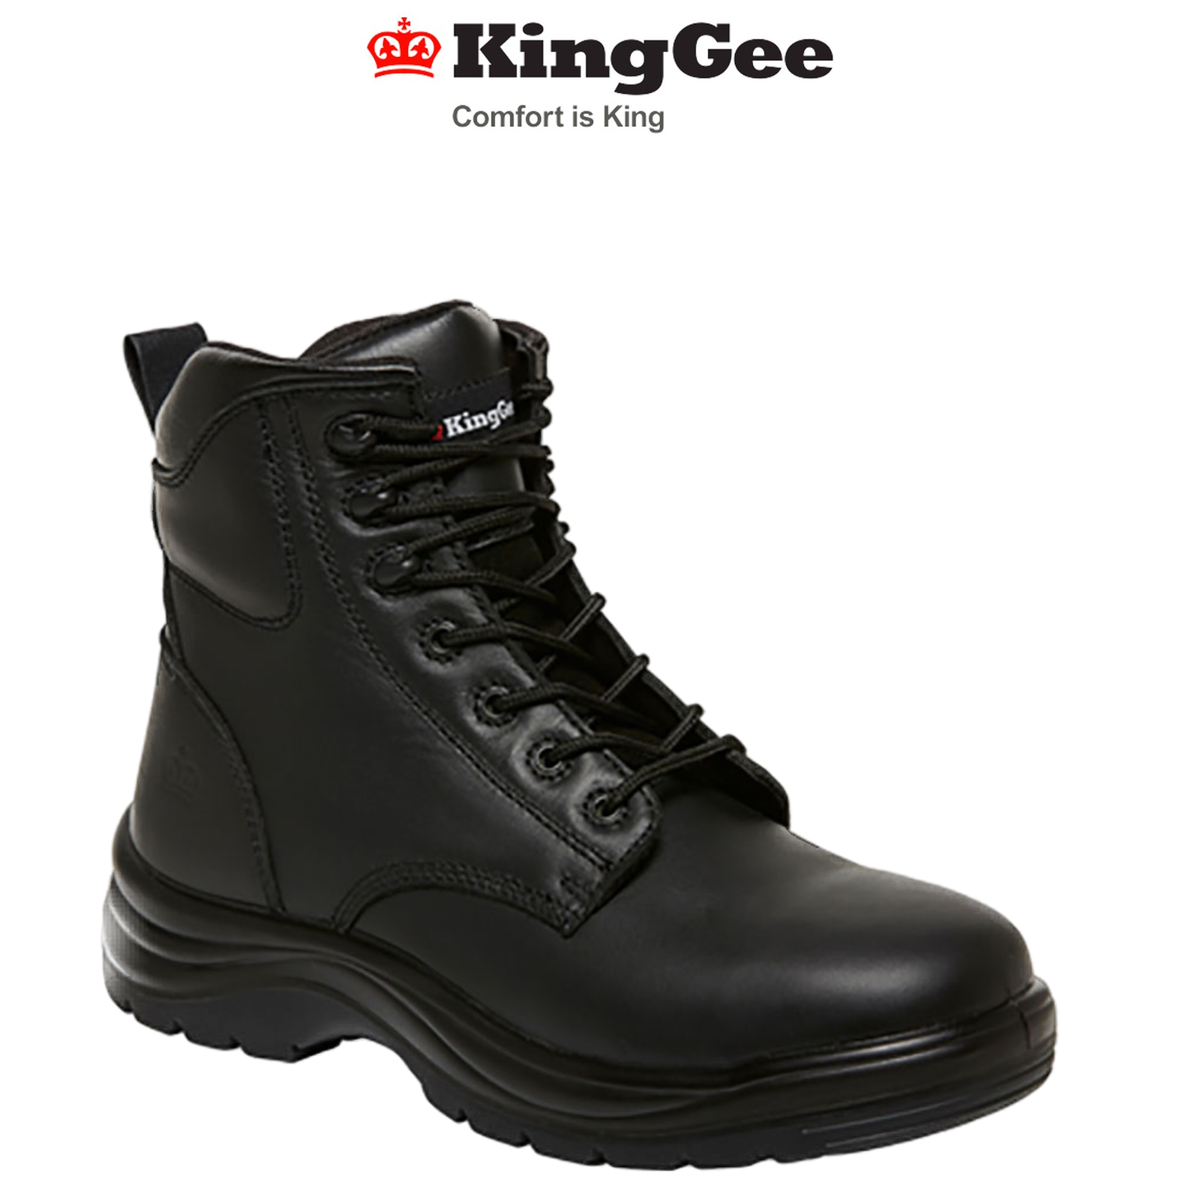 KingGee Mens Cook Boots Tough Work Safety Water Resistant Full Leather K27700